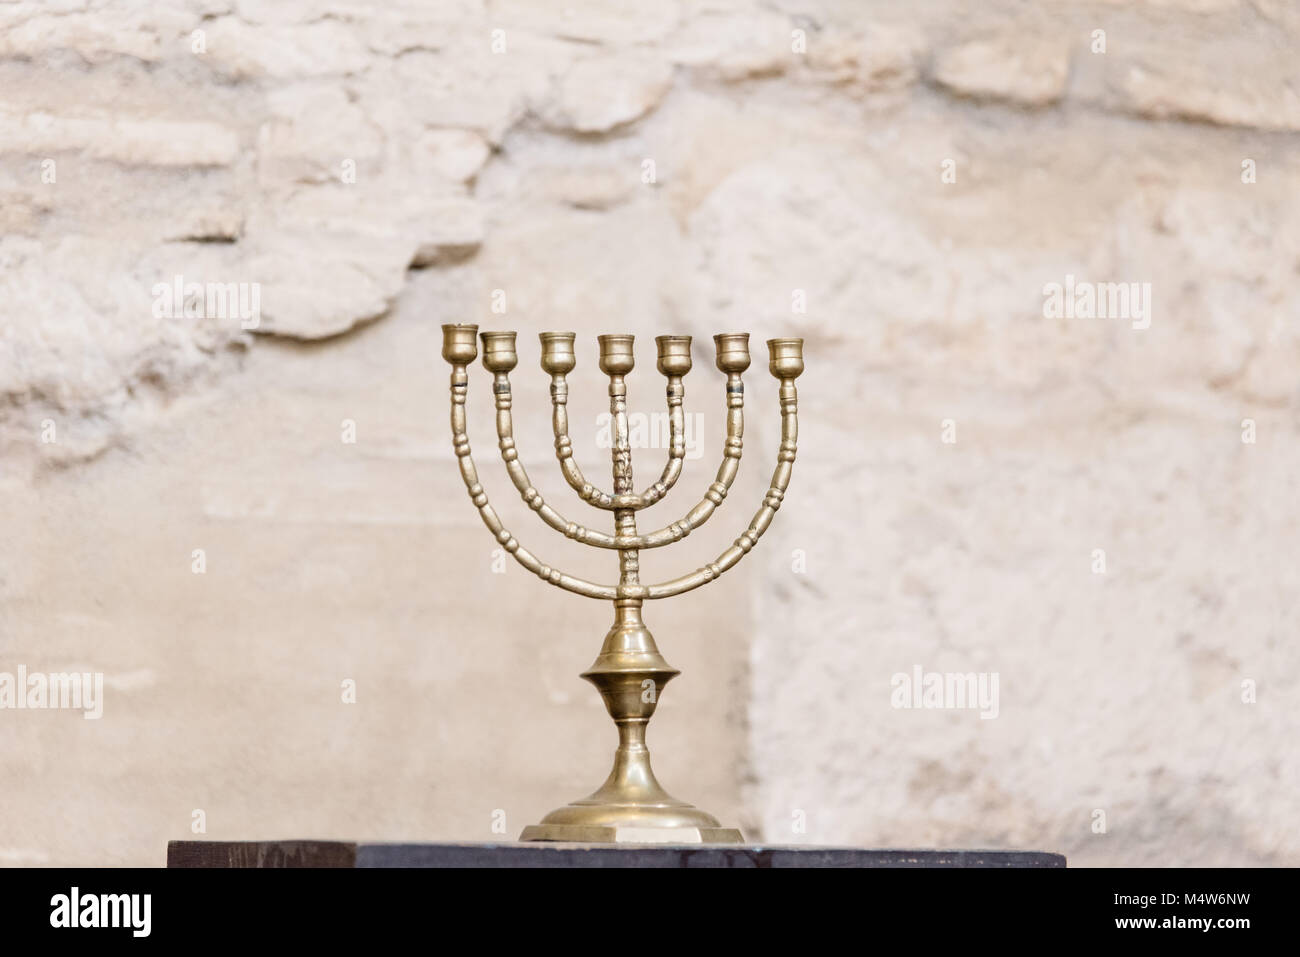 Cordoba, Spain - April 12, 2017: The menorah, the seven-lamp ancient Hebrew lampstand in the synagogue of Cordoba. Stock Photo